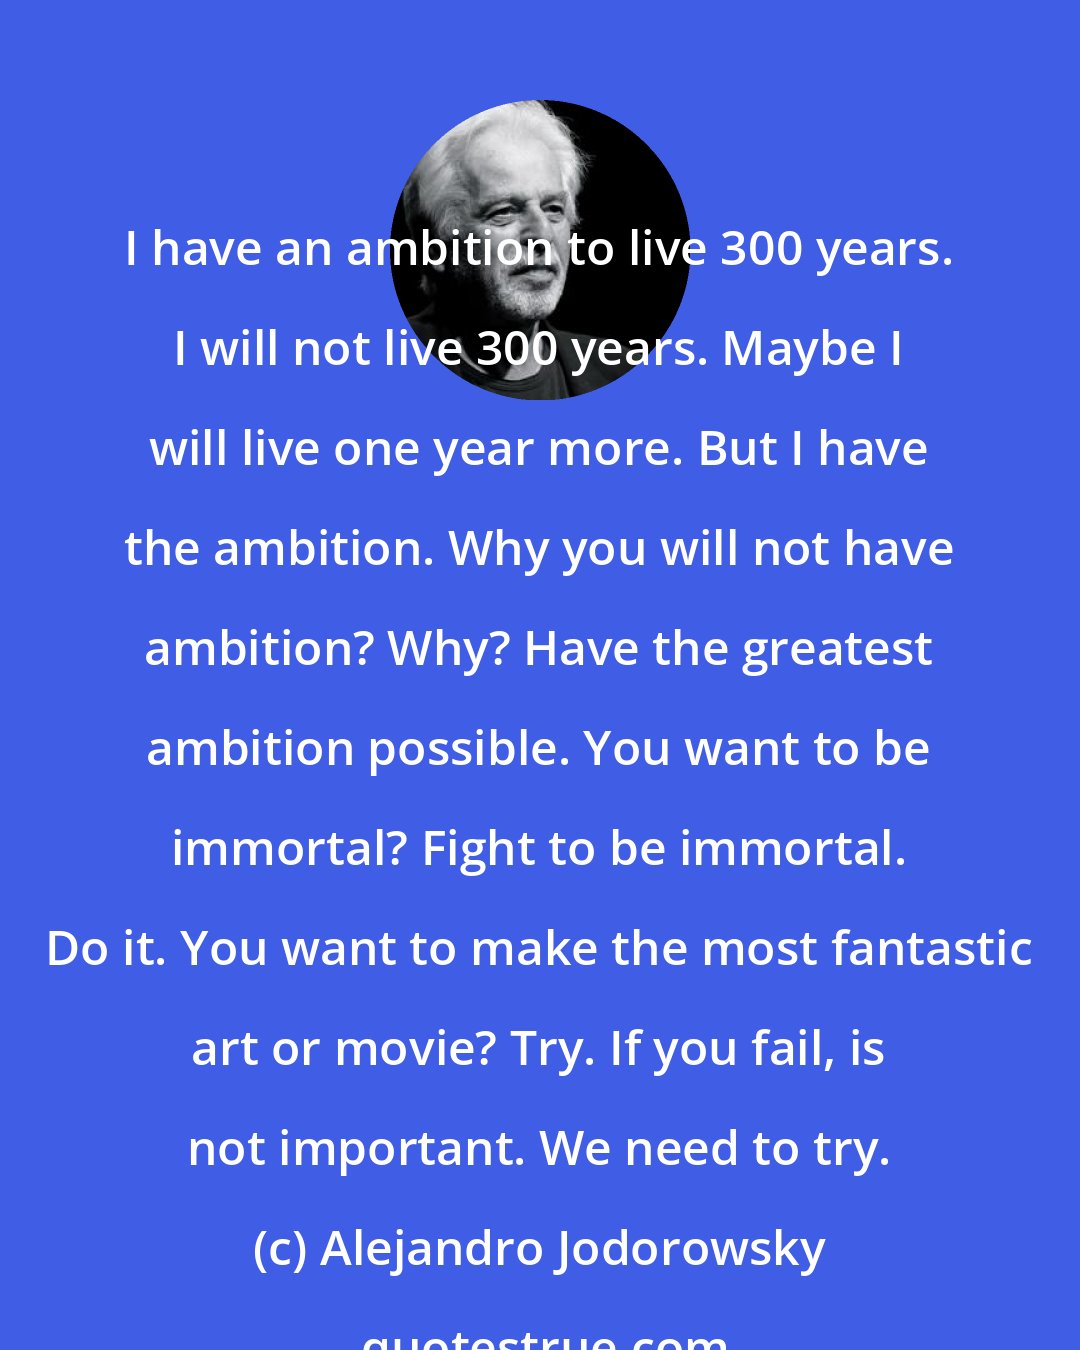 Alejandro Jodorowsky: I have an ambition to live 300 years. I will not live 300 years. Maybe I will live one year more. But I have the ambition. Why you will not have ambition? Why? Have the greatest ambition possible. You want to be immortal? Fight to be immortal. Do it. You want to make the most fantastic art or movie? Try. If you fail, is not important. We need to try.